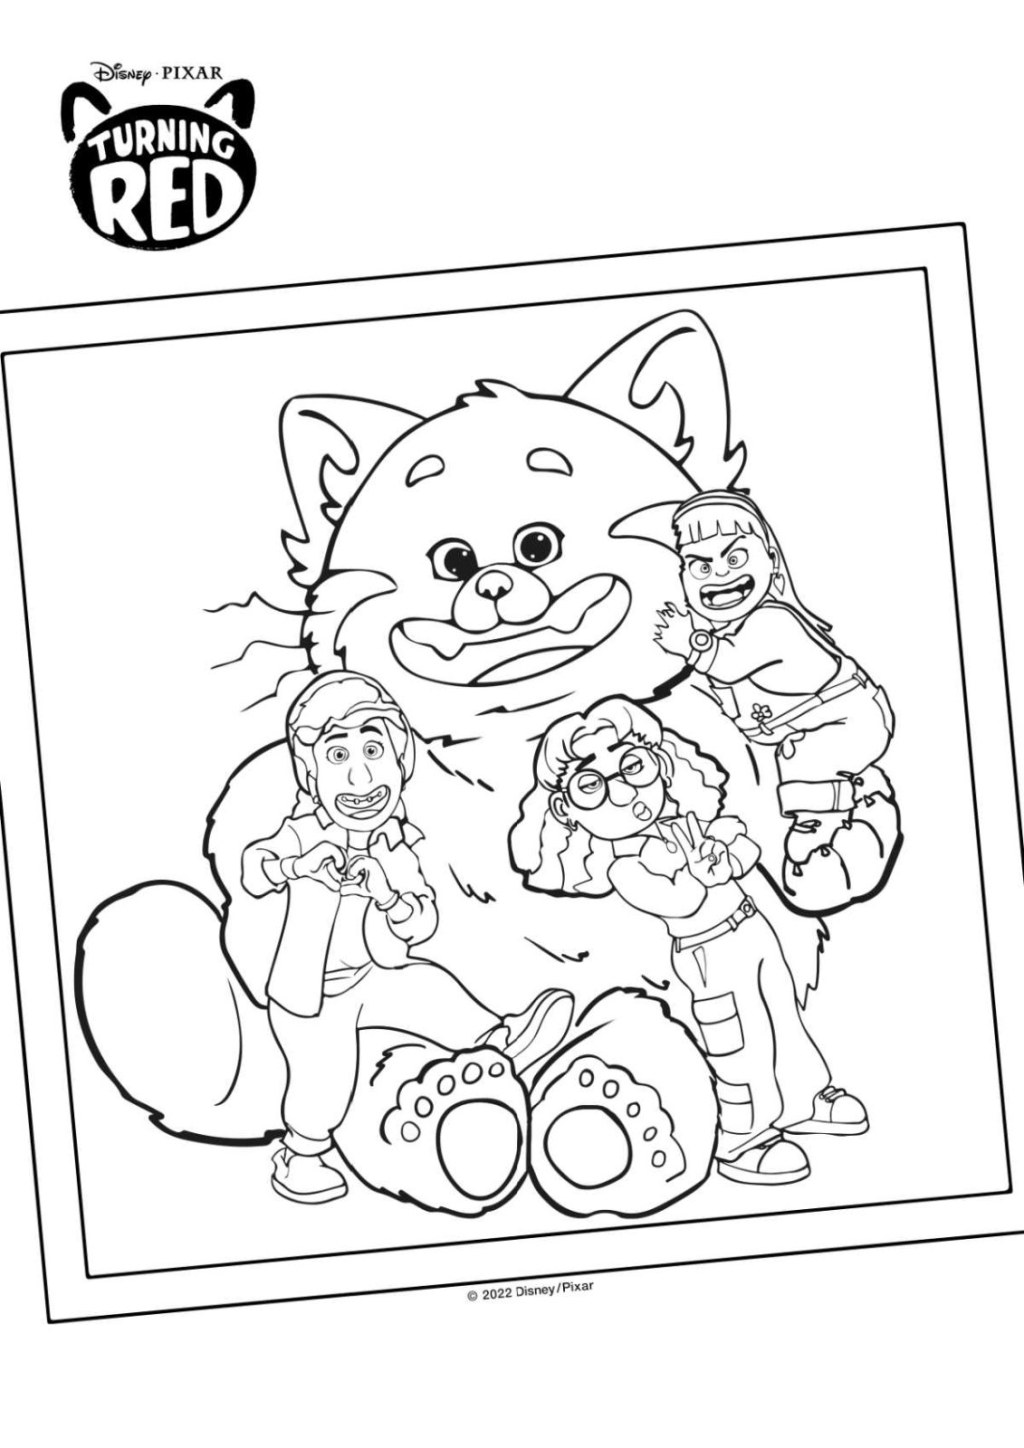 Picture of: Free Printable Turning Red Panda Coloring Page – Mama Likes This